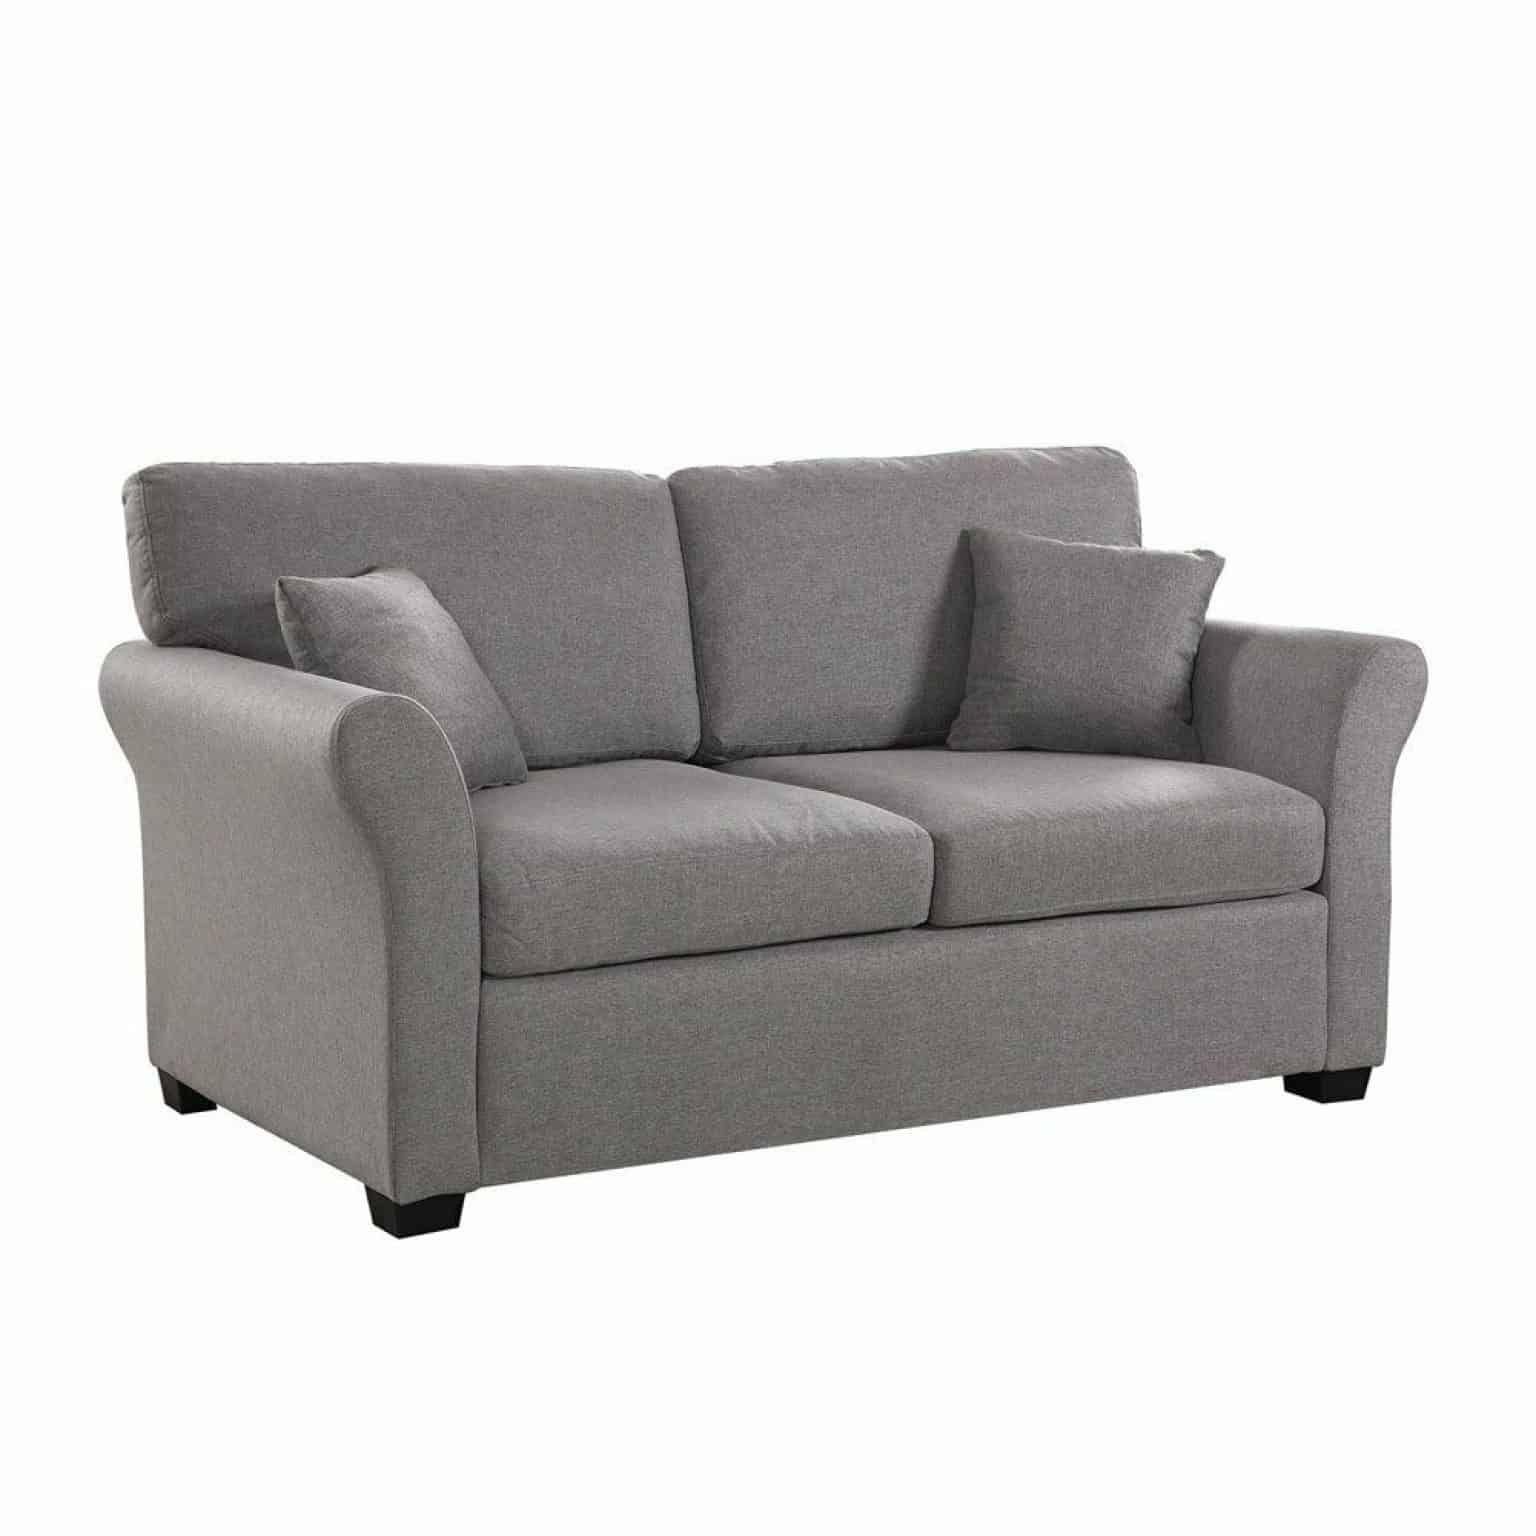 63" Bluish Grey Cozy Loveseat Sofa W/ 2 Accent Pillows – Affordable Pertaining To Sofas In Bluish Grey (View 4 of 20)